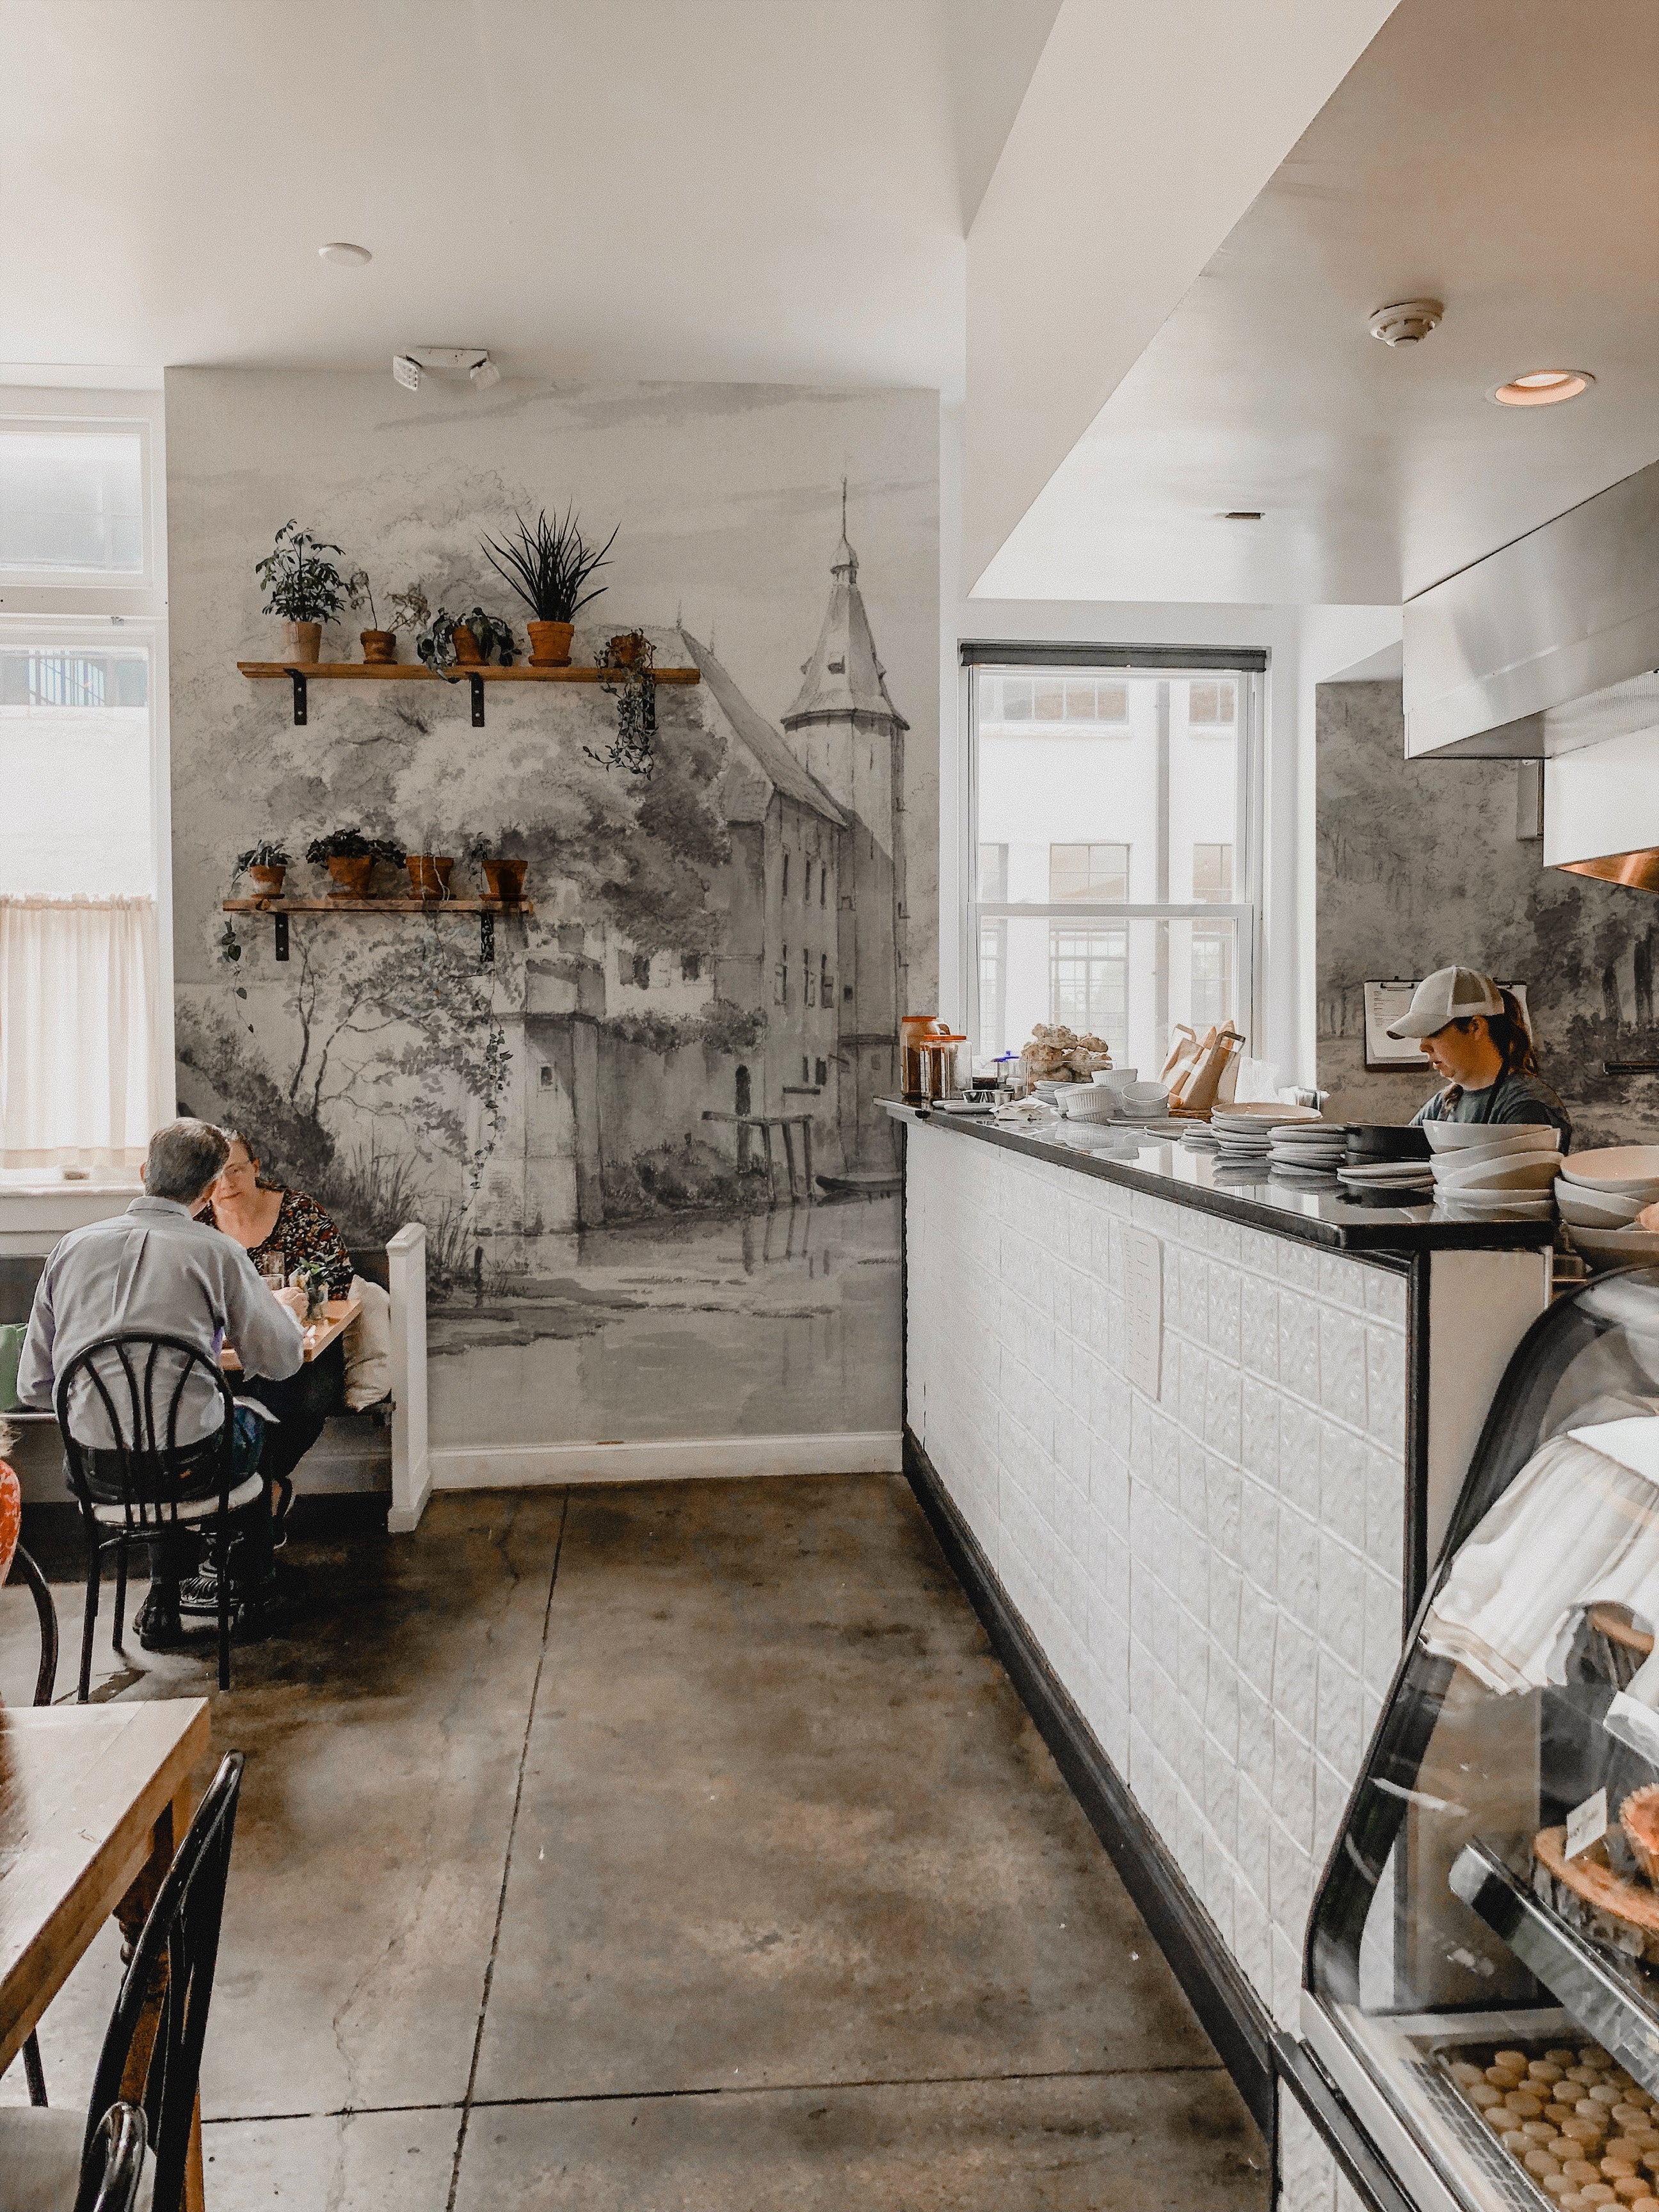 A cafe interior adorned with 'Kasteel Soelen - Wall Mural Wallpaper', featuring a castle surrounded by trees. The vintage-inspired mural creates a cozy and inviting atmosphere for the diners seated nearby.